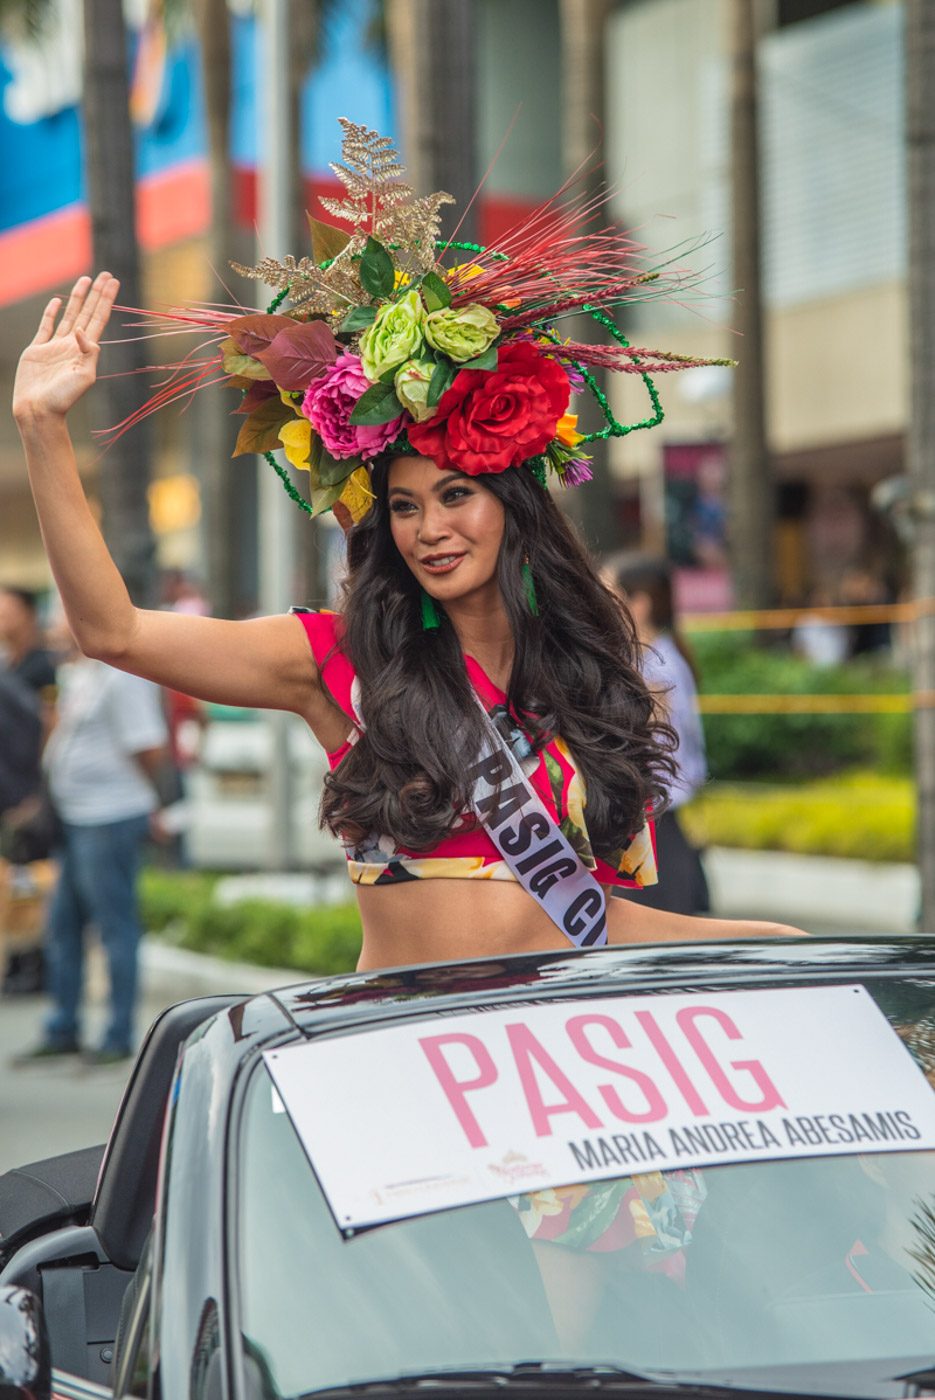 PARADE. Aya Abesamis during the annual Parade of Beauties. Photo by Rob Reyes/Rappler 